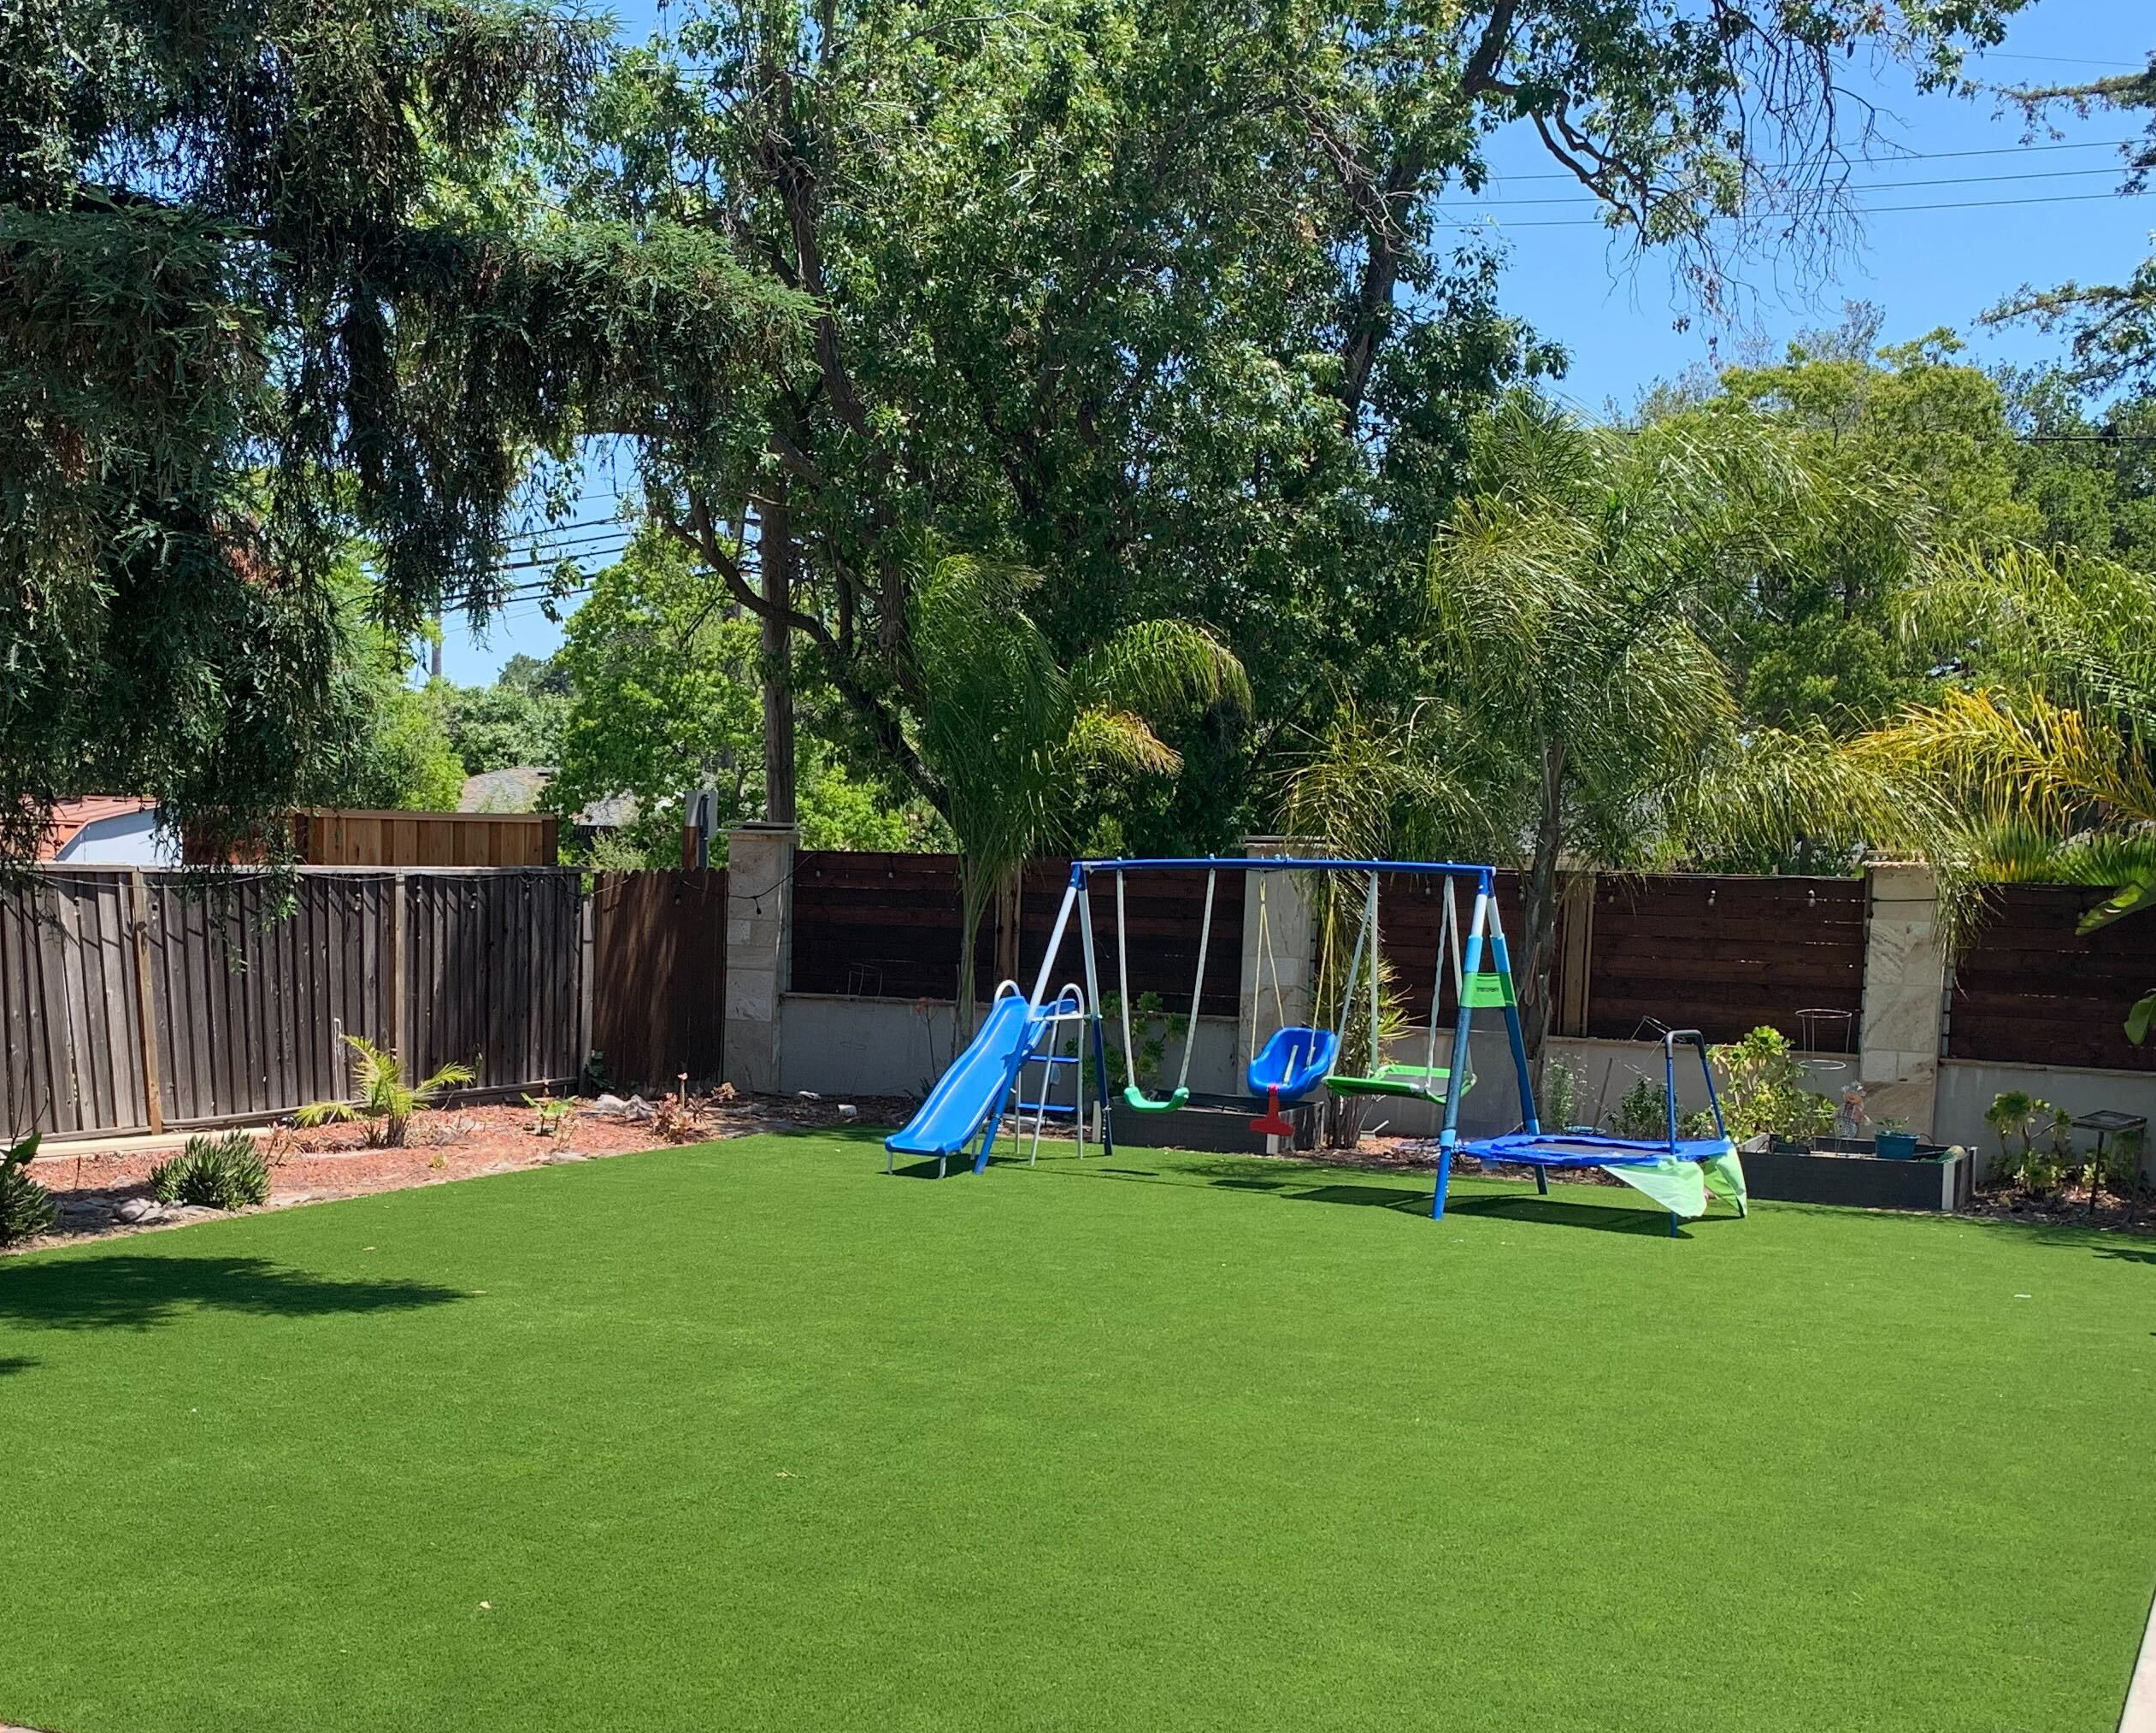 How to Incorporate a Play Area into Your Artificial Grass Backyard Design